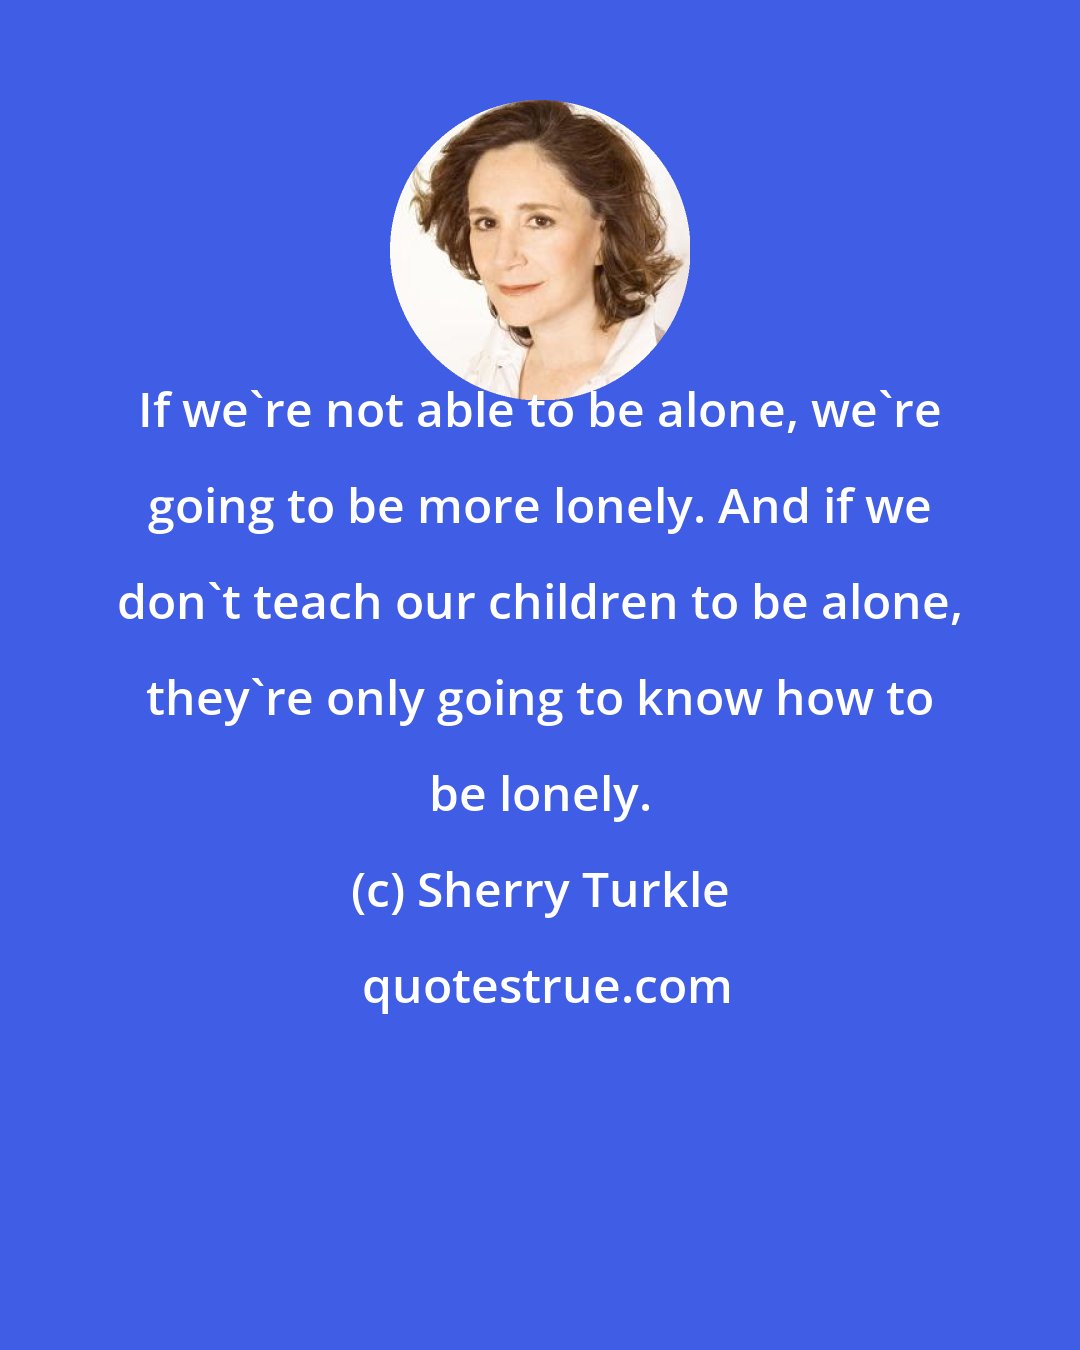 Sherry Turkle: If we're not able to be alone, we're going to be more lonely. And if we don't teach our children to be alone, they're only going to know how to be lonely.